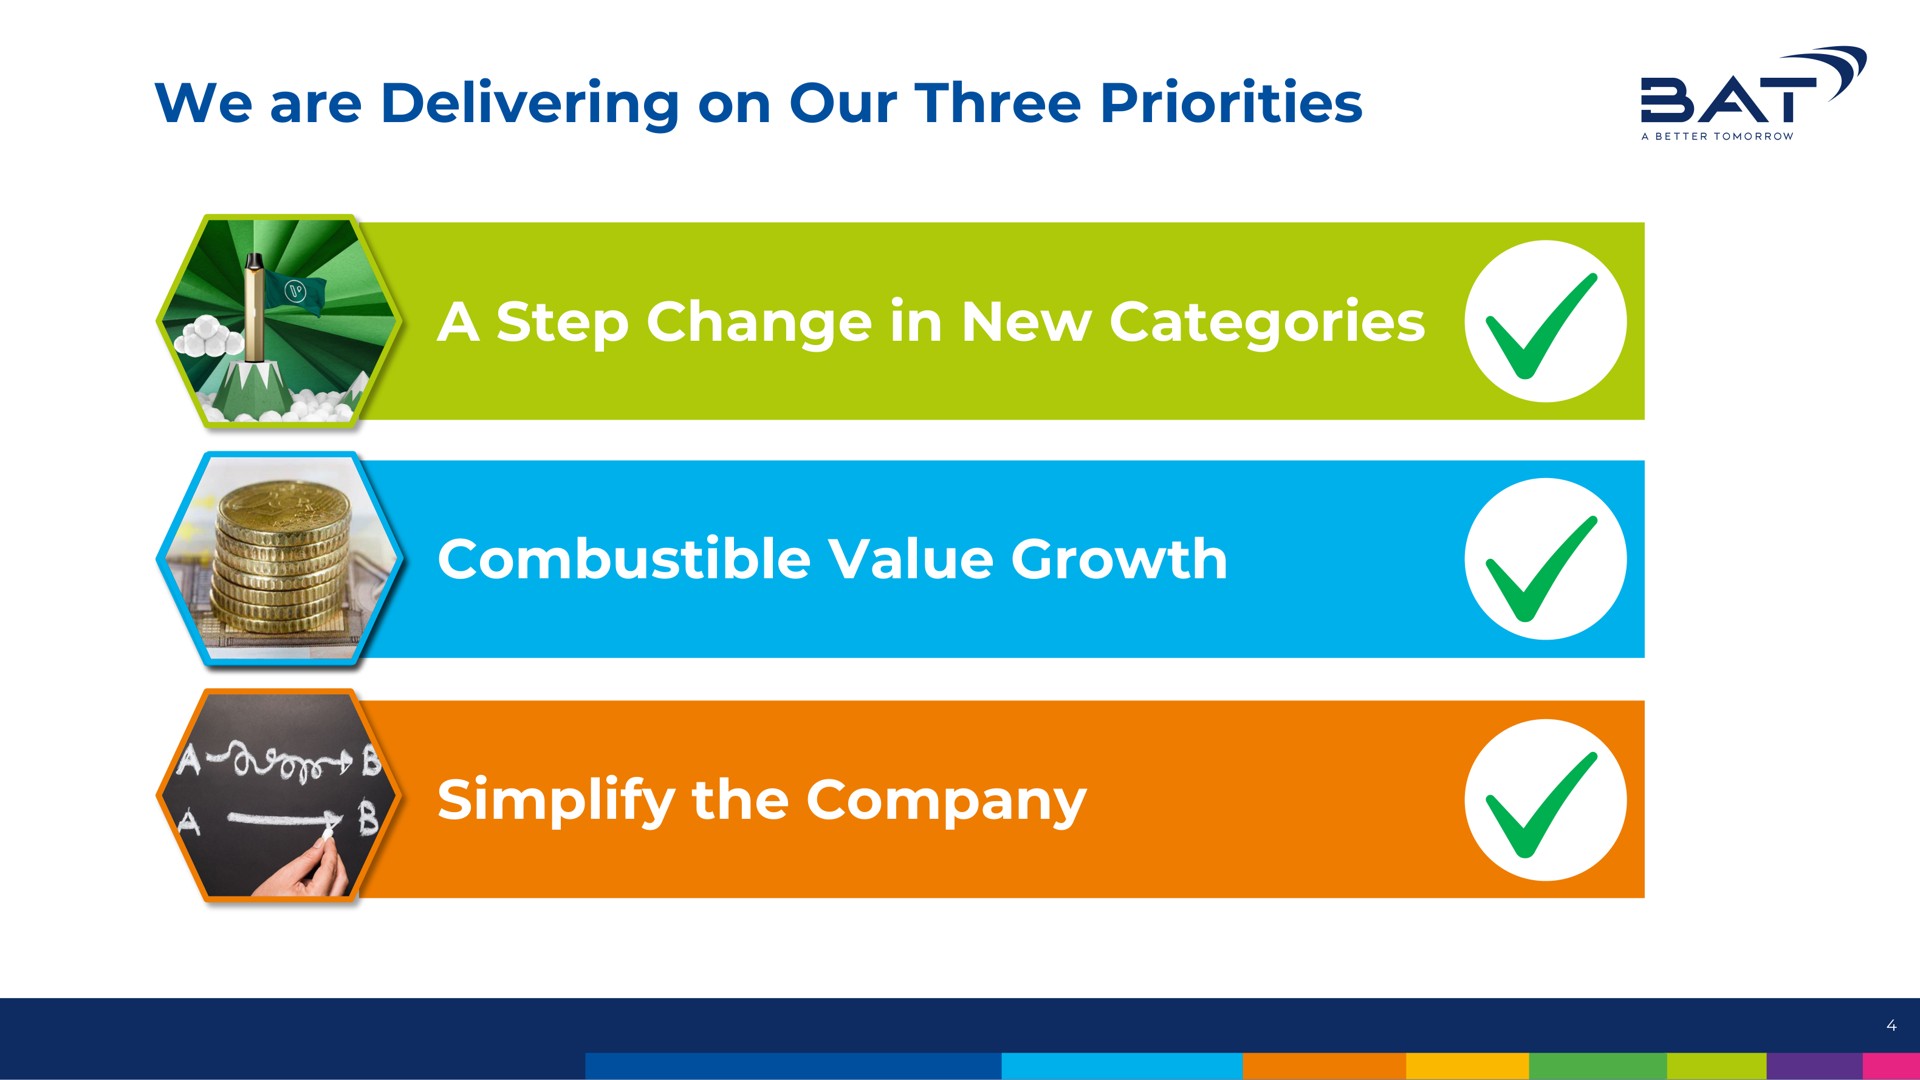 we are delivering on our three priorities a step change in new categories combustible value growth simplify the company | BAT